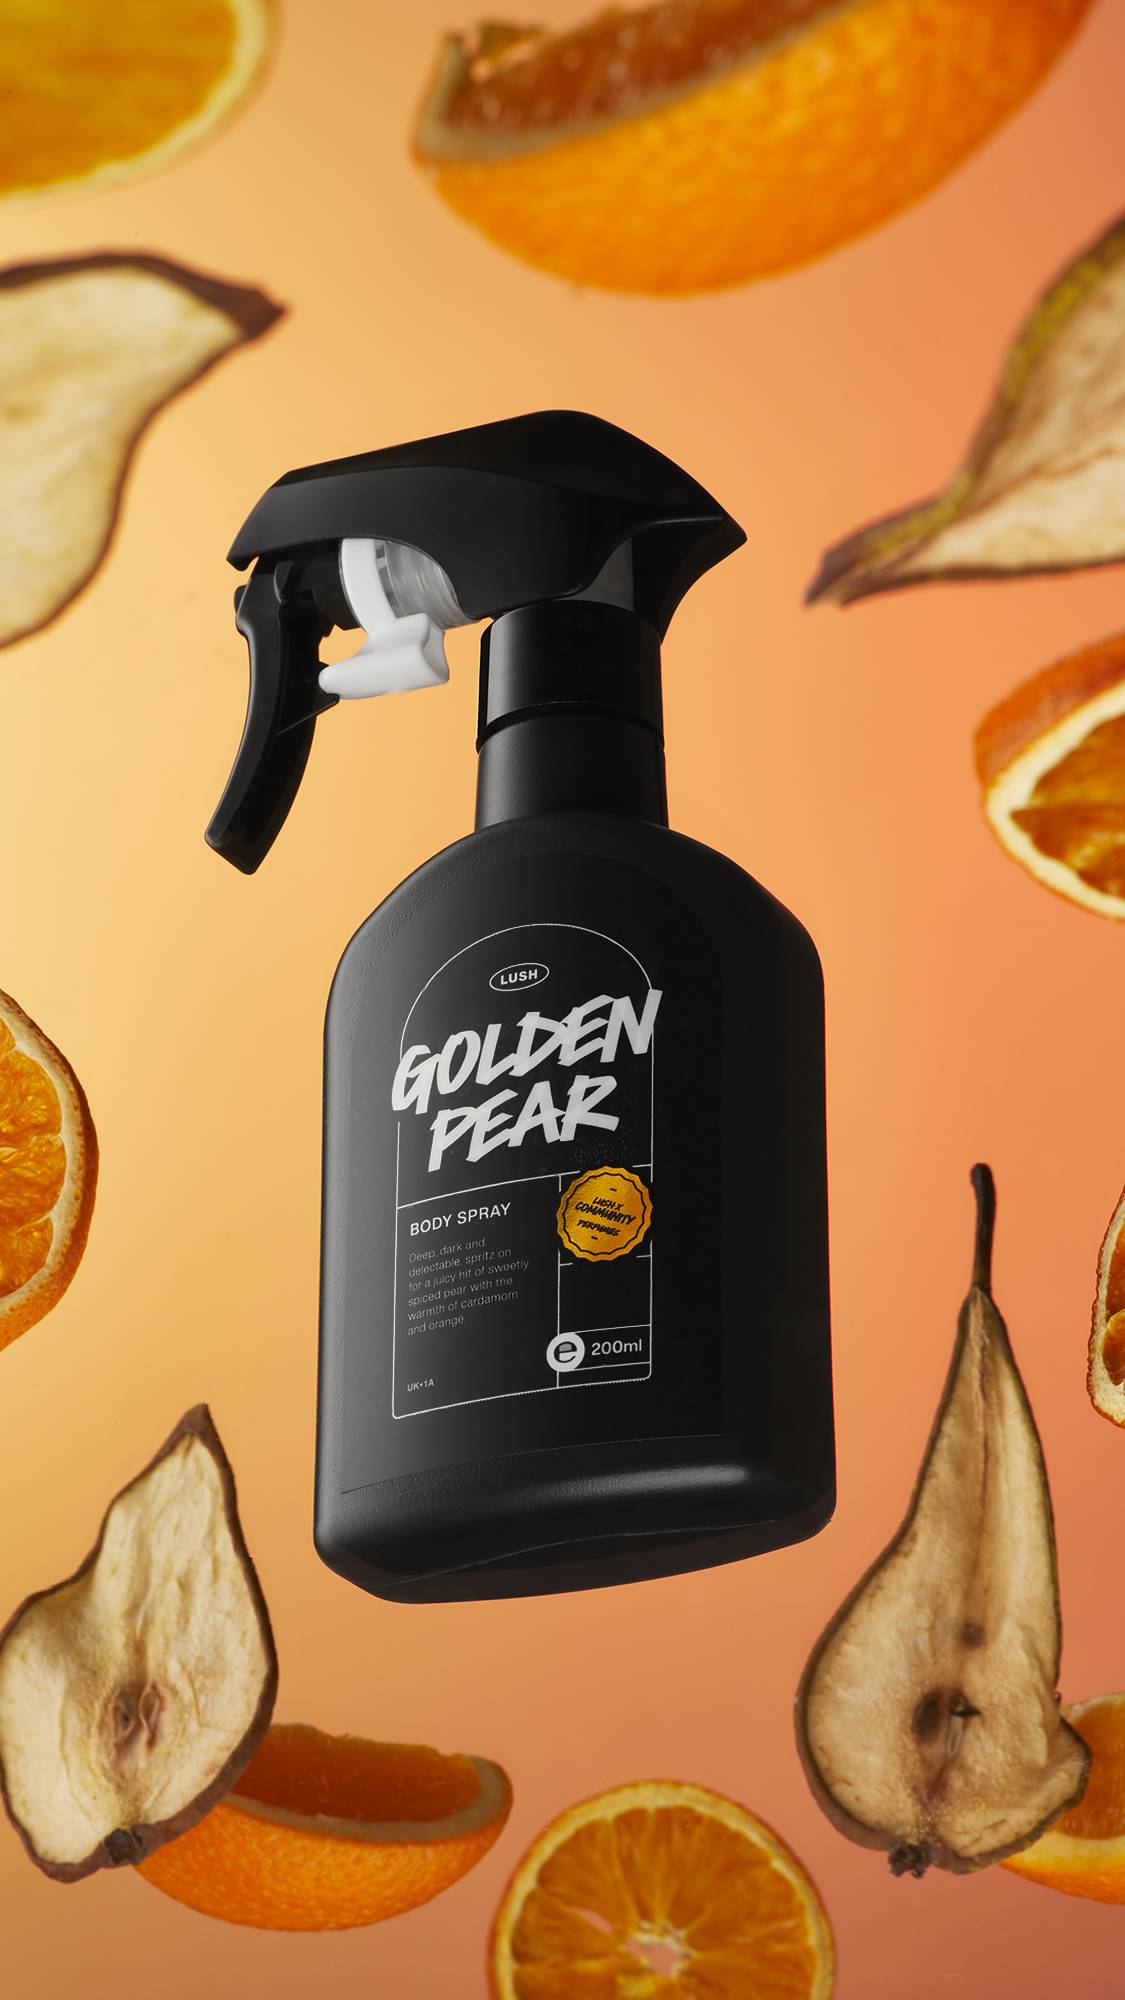 The black Golden Pear body spray body is in front of an orange background surrounded by dried pear and orange slices.